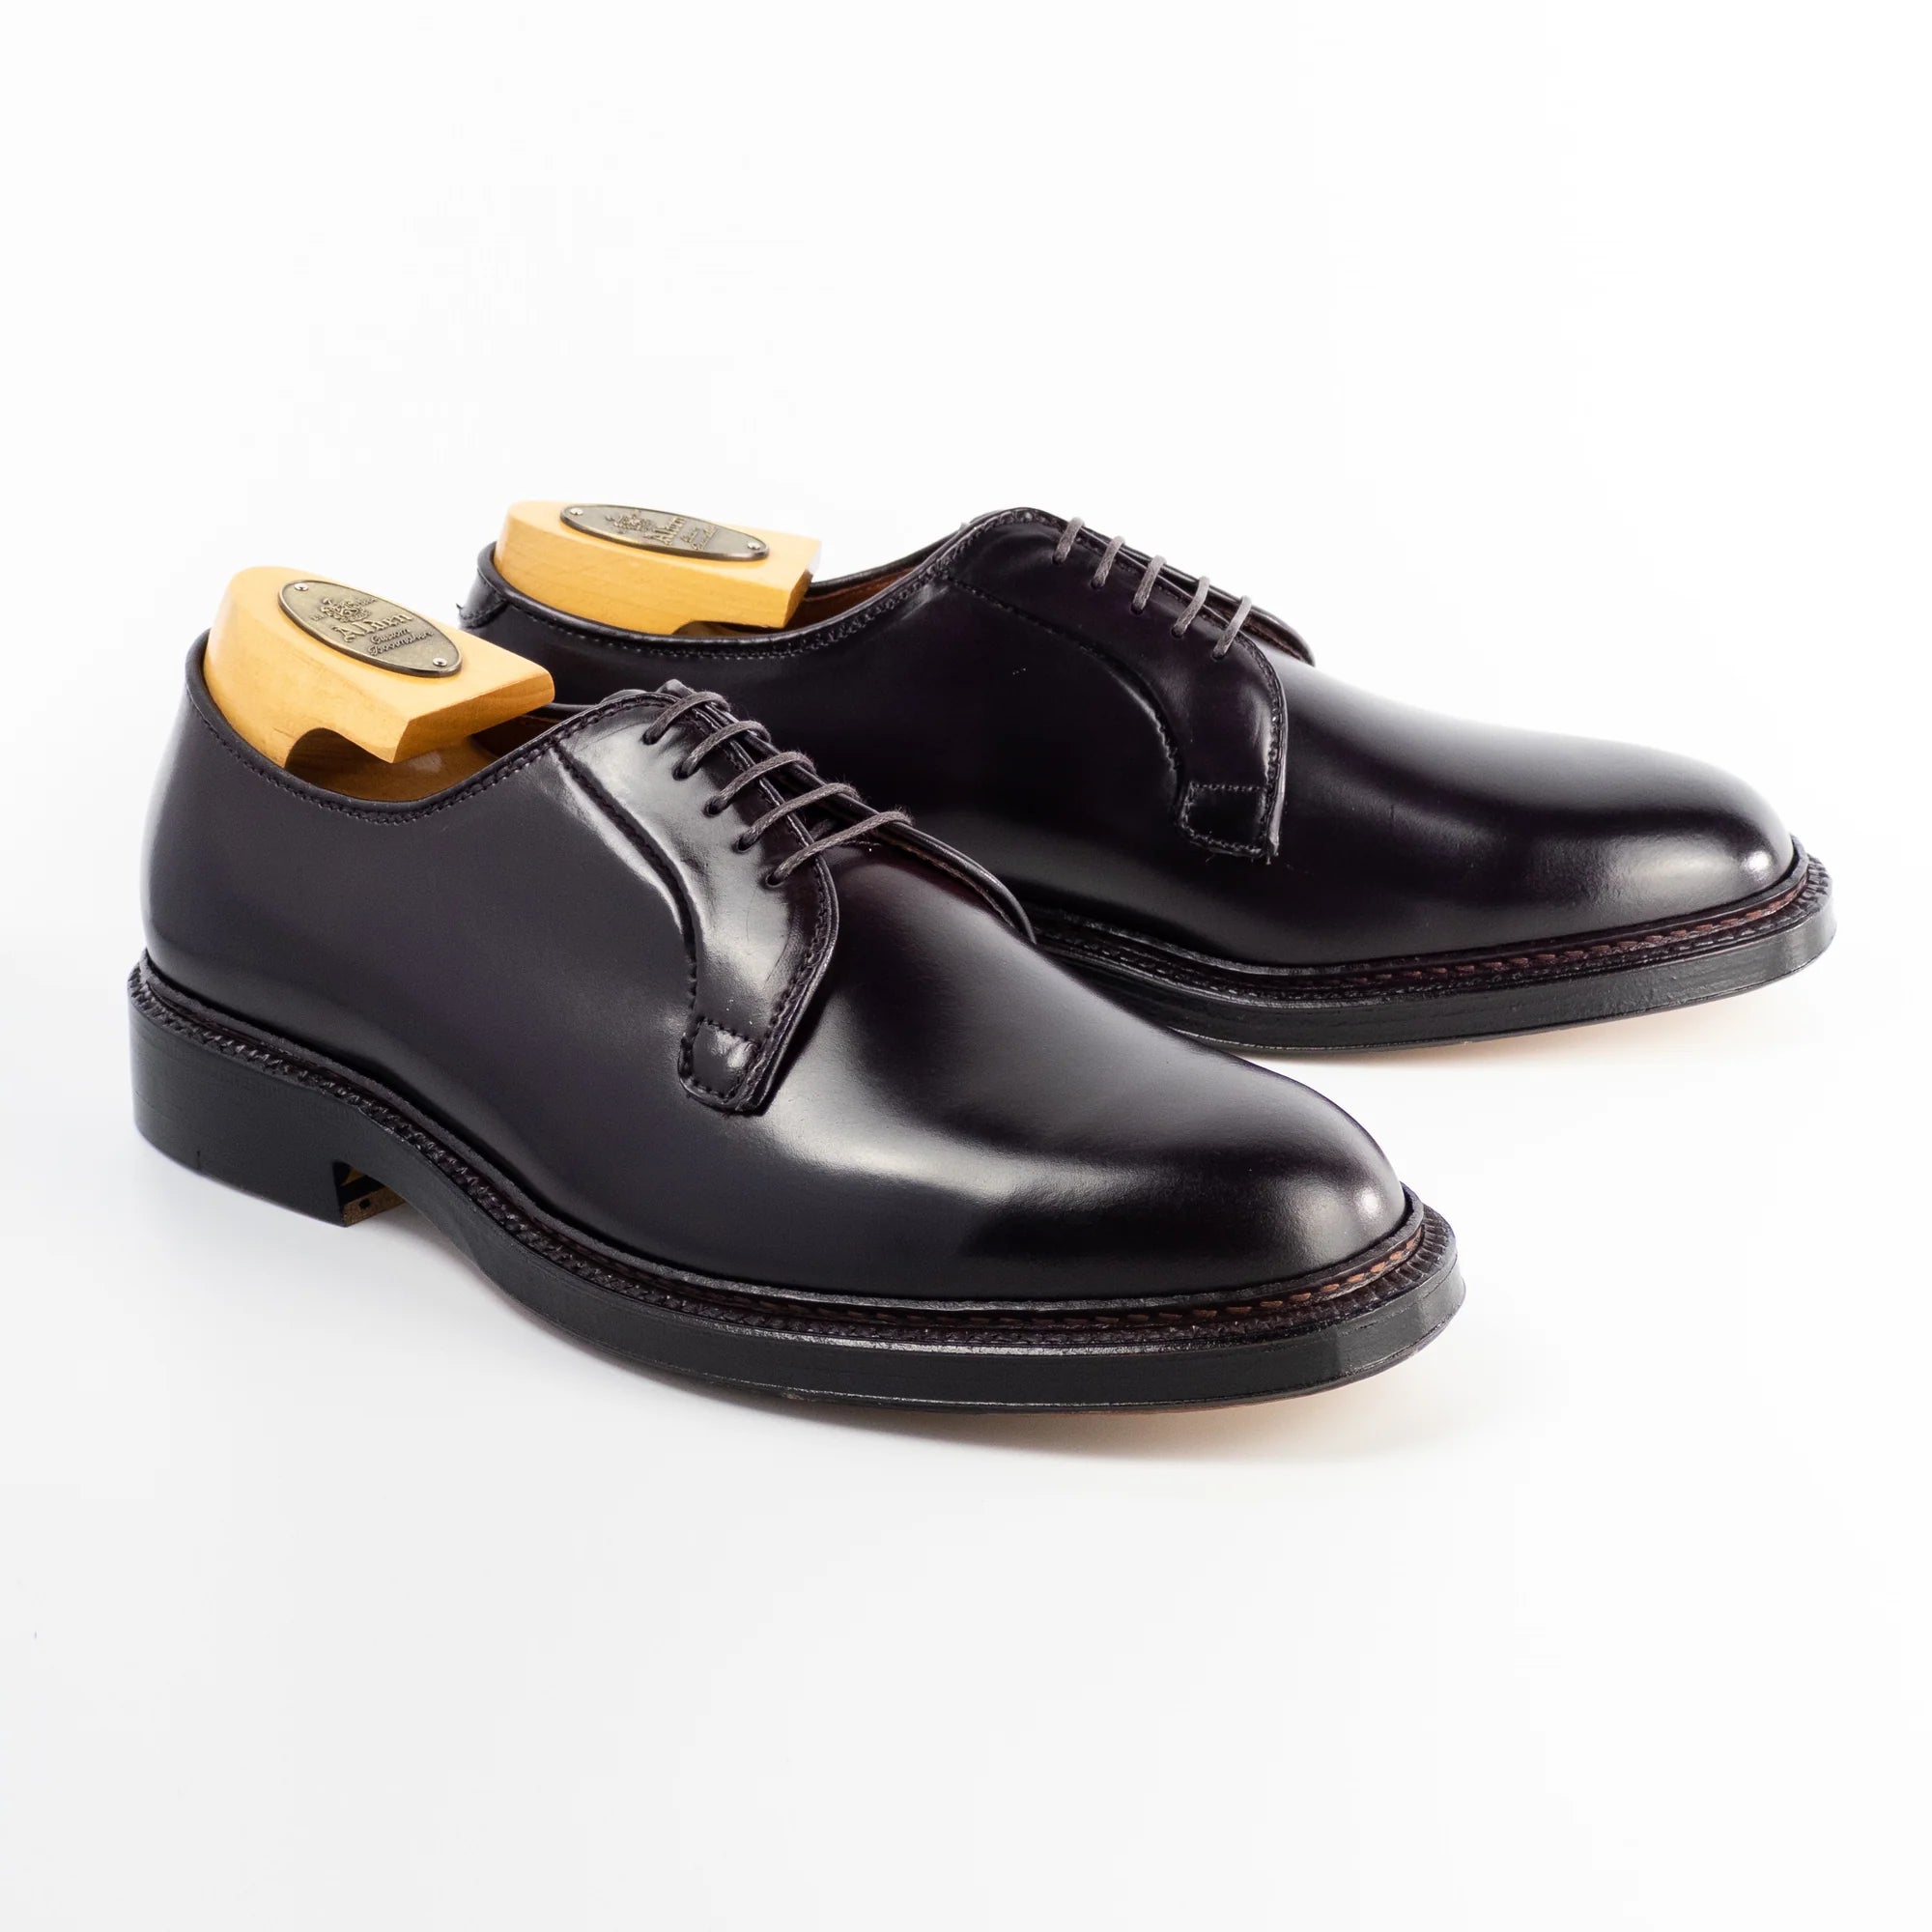 quilp tricker's 8 nepenthes alden beamsエンジニアードガーメンツ